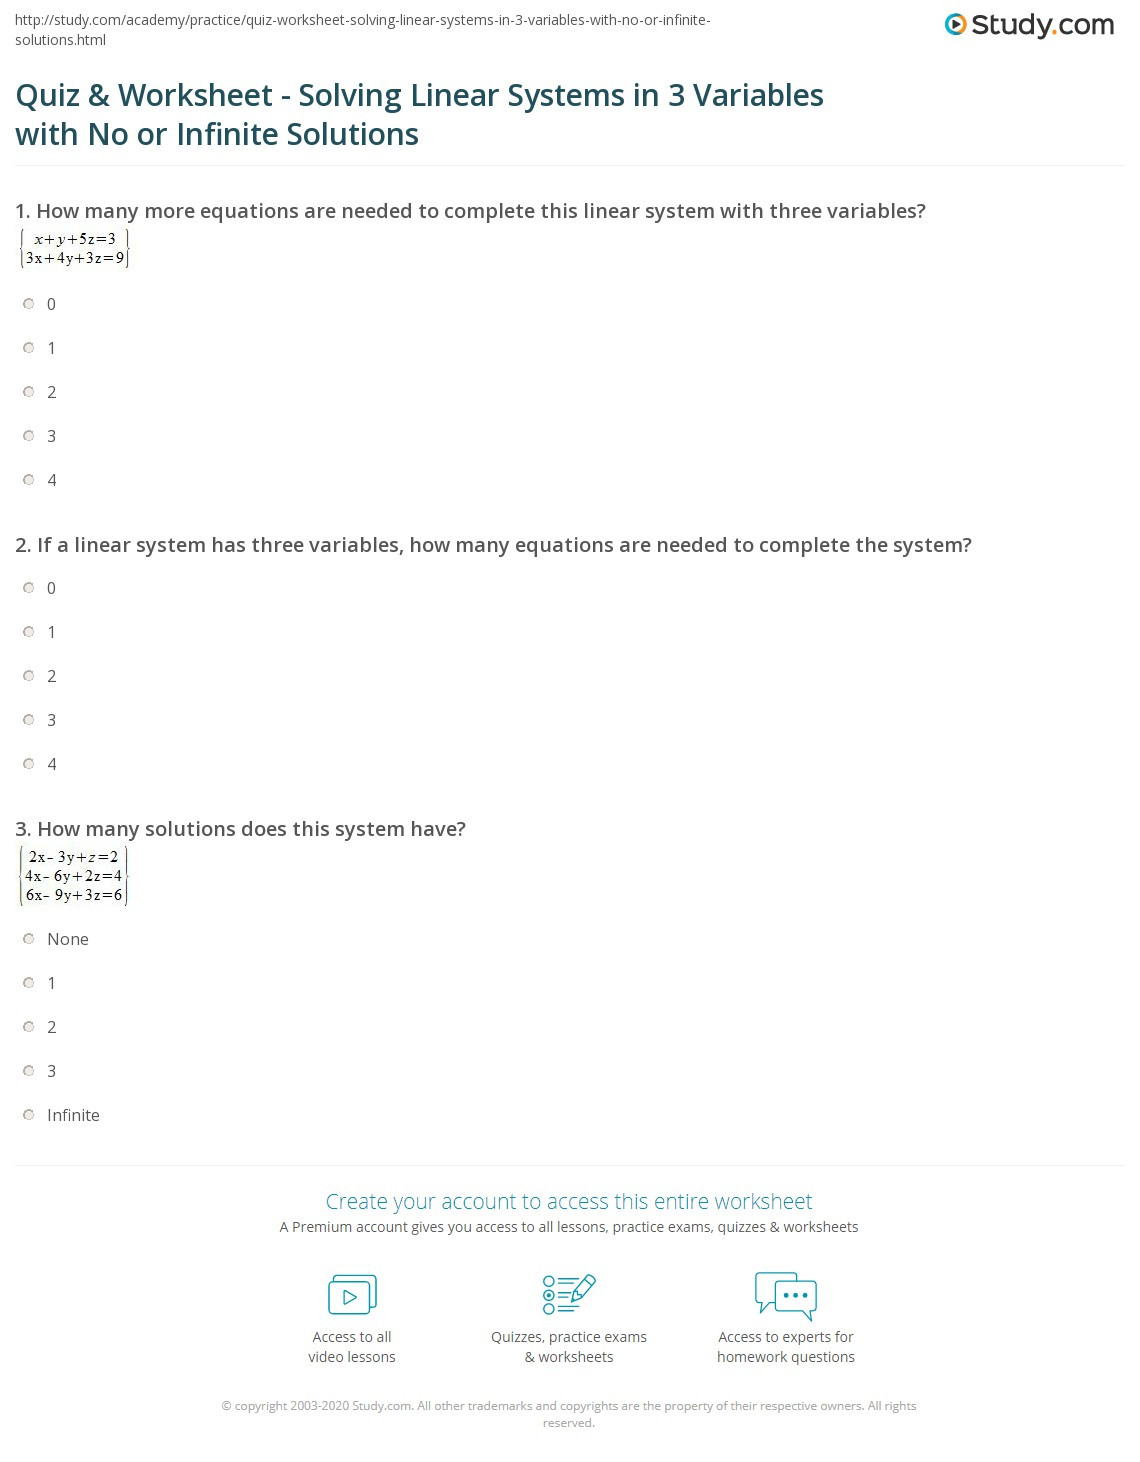 Solving Systems by Elimination Worksheet Quiz &amp; Worksheet solving Linear Systems In 3 Variables